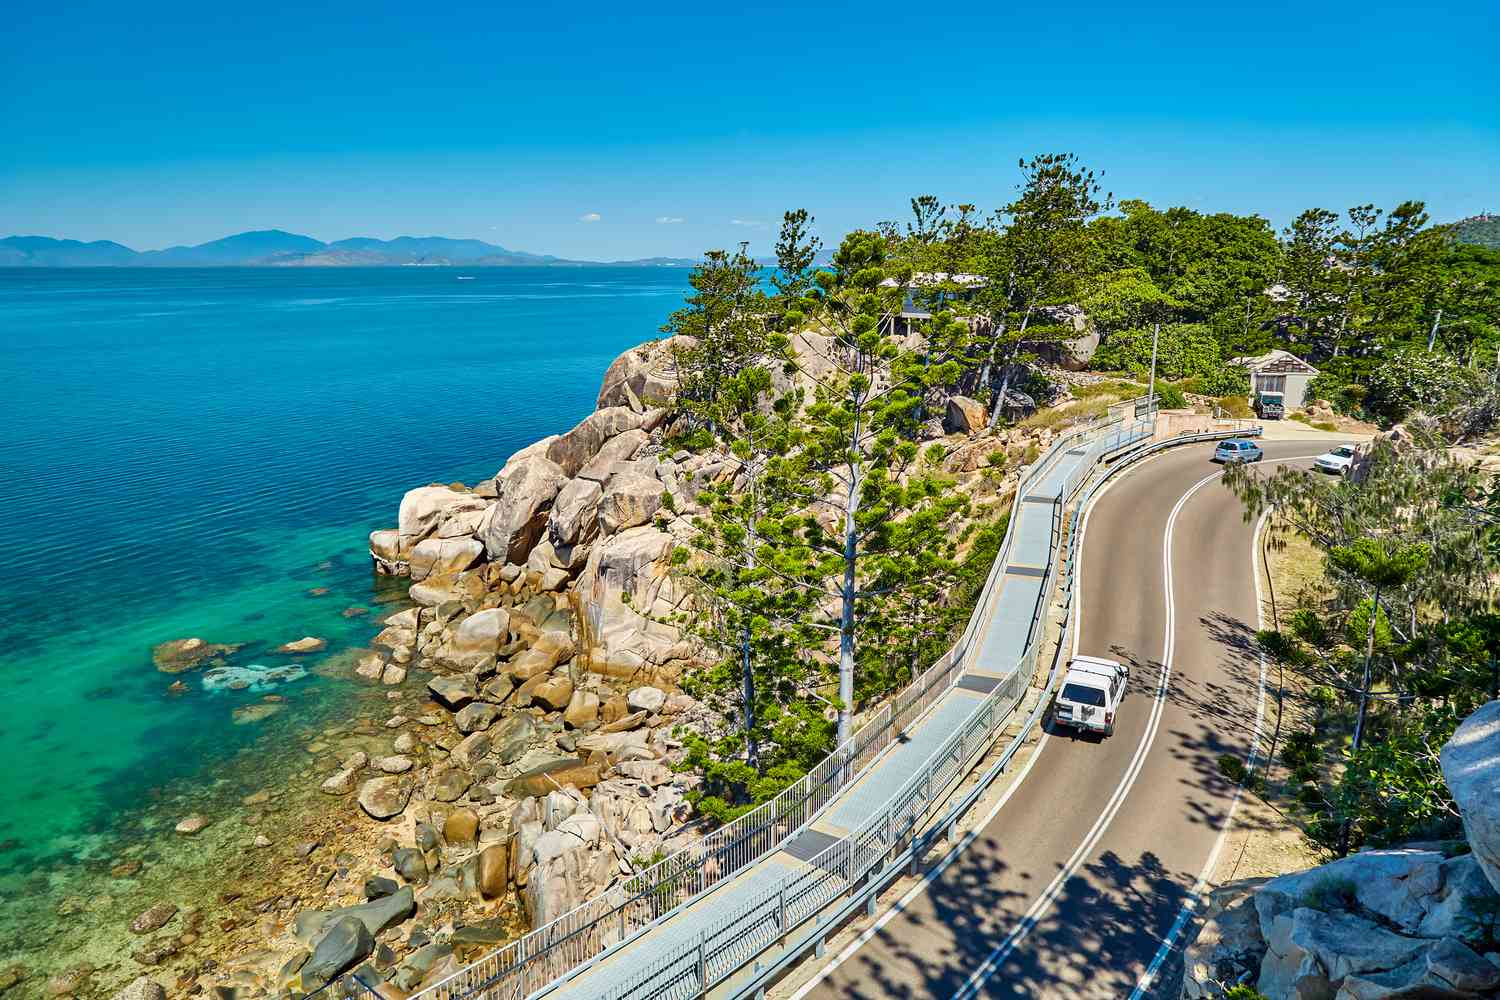 Magnetic Island offers the natural beauty and serenity of an untouched paradise within a thriving community.